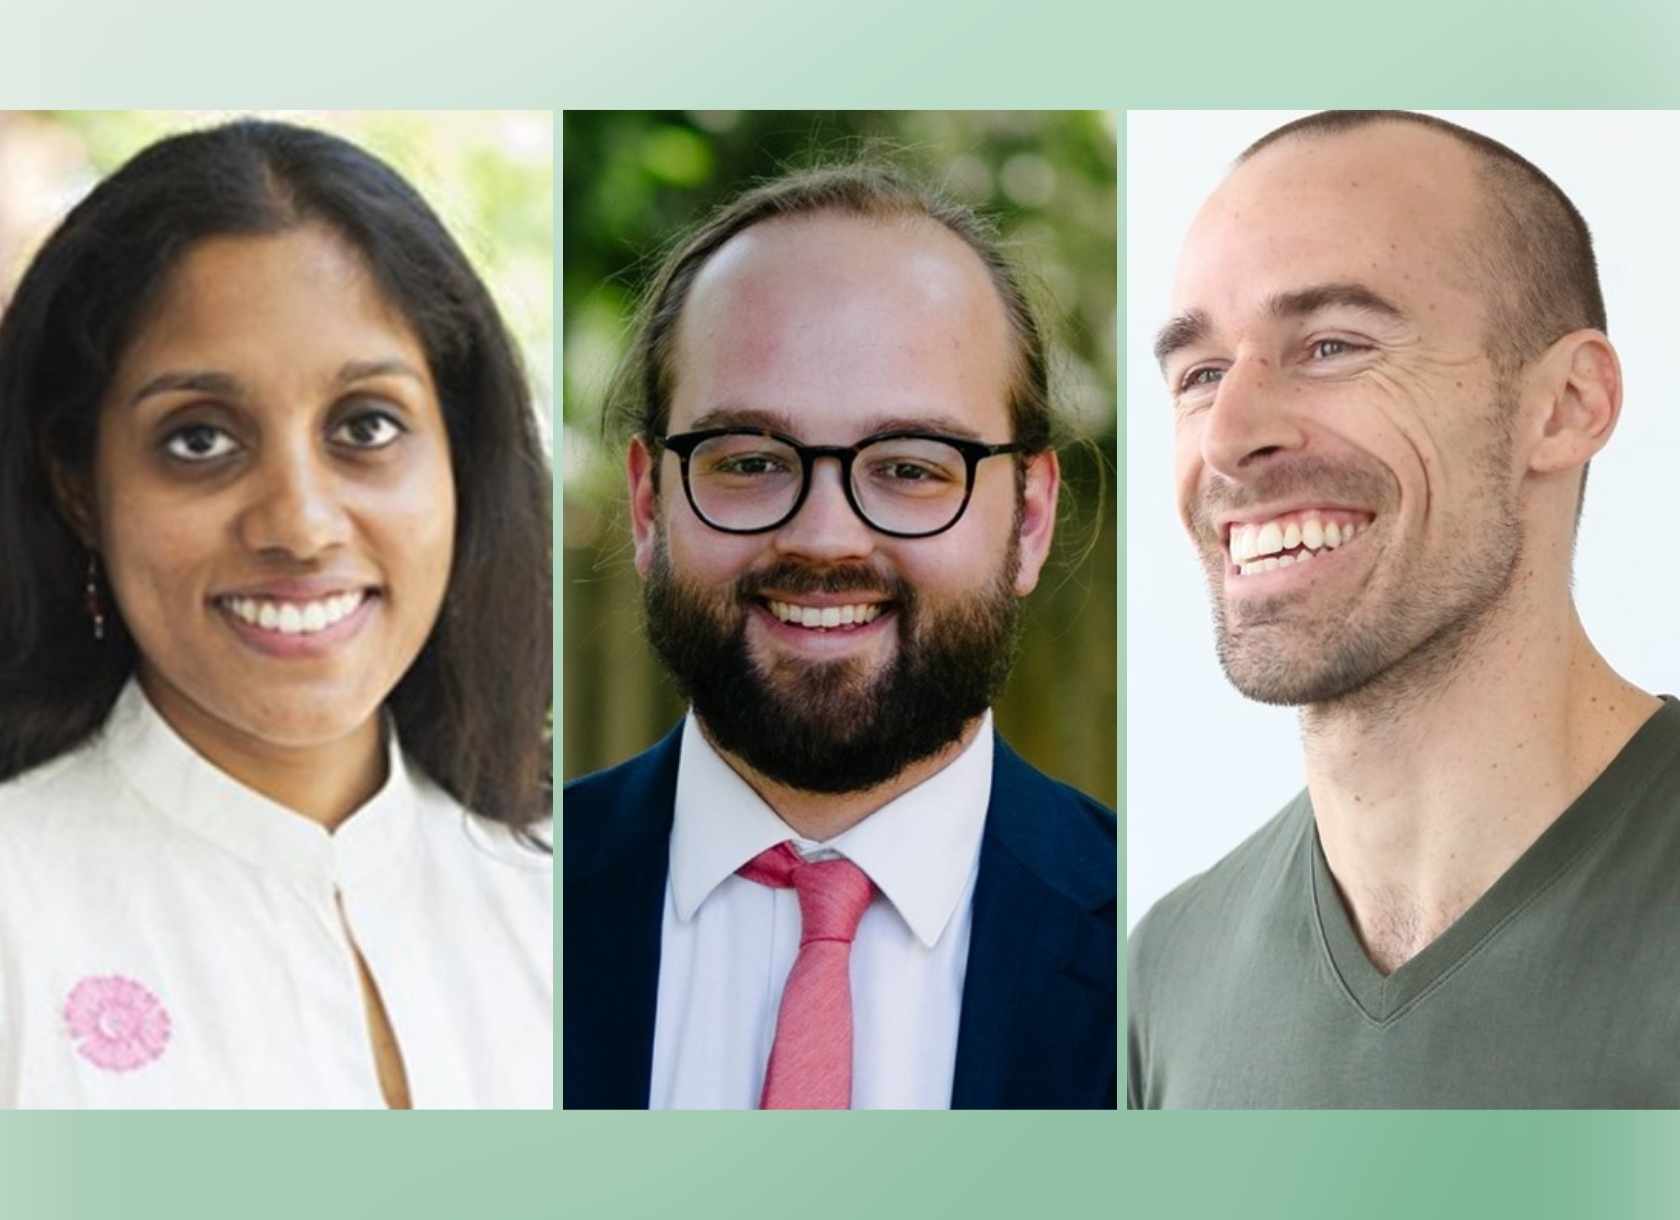 Portrait compilation of Scripps College faculty Nayana Bose, Ted Bartholomew, and Kevin Williamson